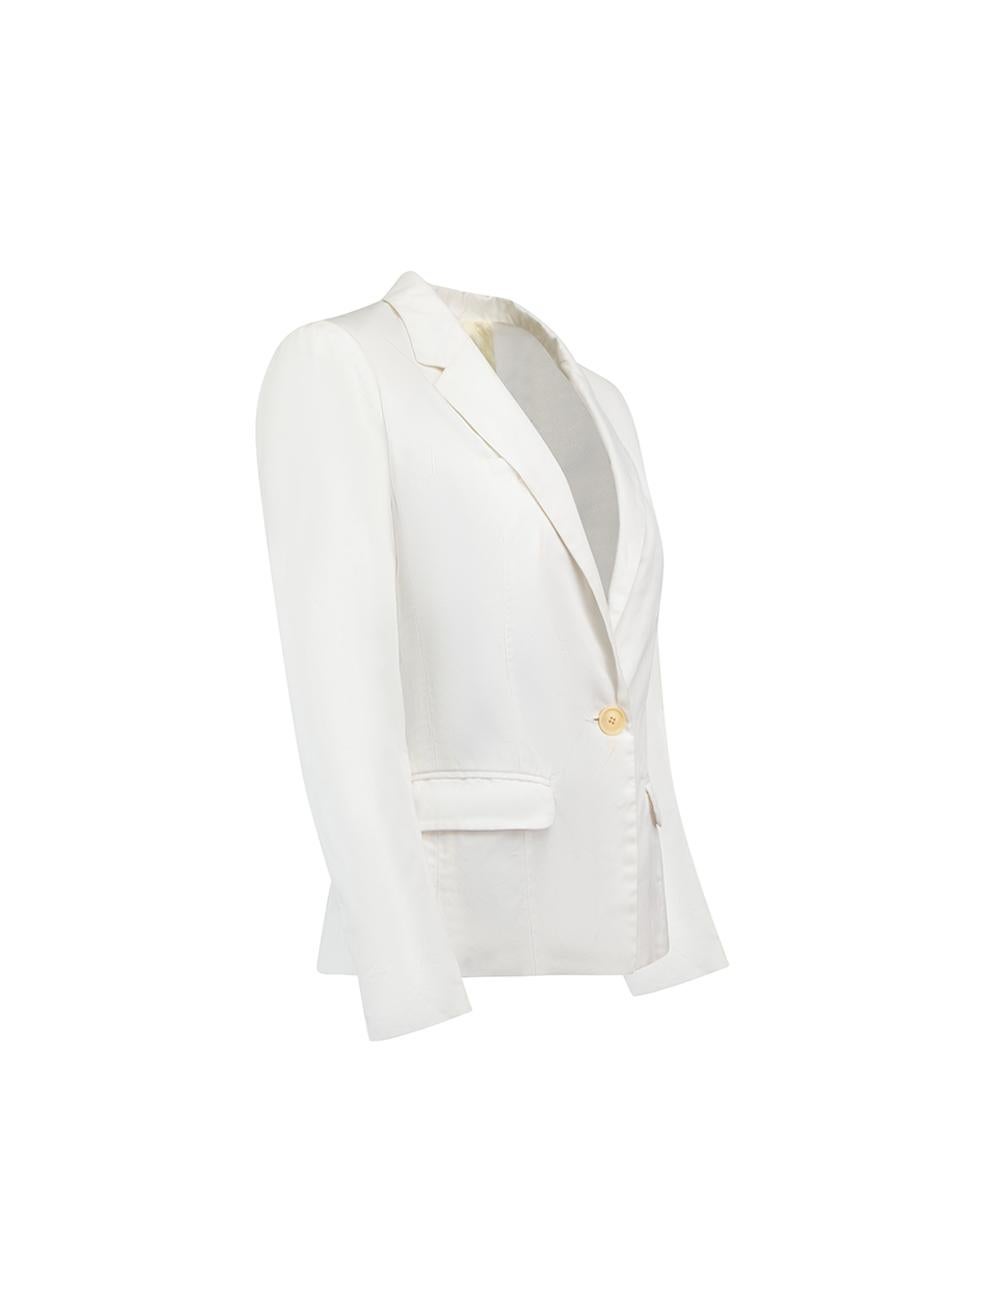 CONDITION is Very good. Minimal wear to jacket is evident. Minimal wear to fabric seen however small mark found on left elbow of this used Isabel Marant Étoile designer resale item. 



Details


White

Cotton

Single breasted blazer

Buttoned